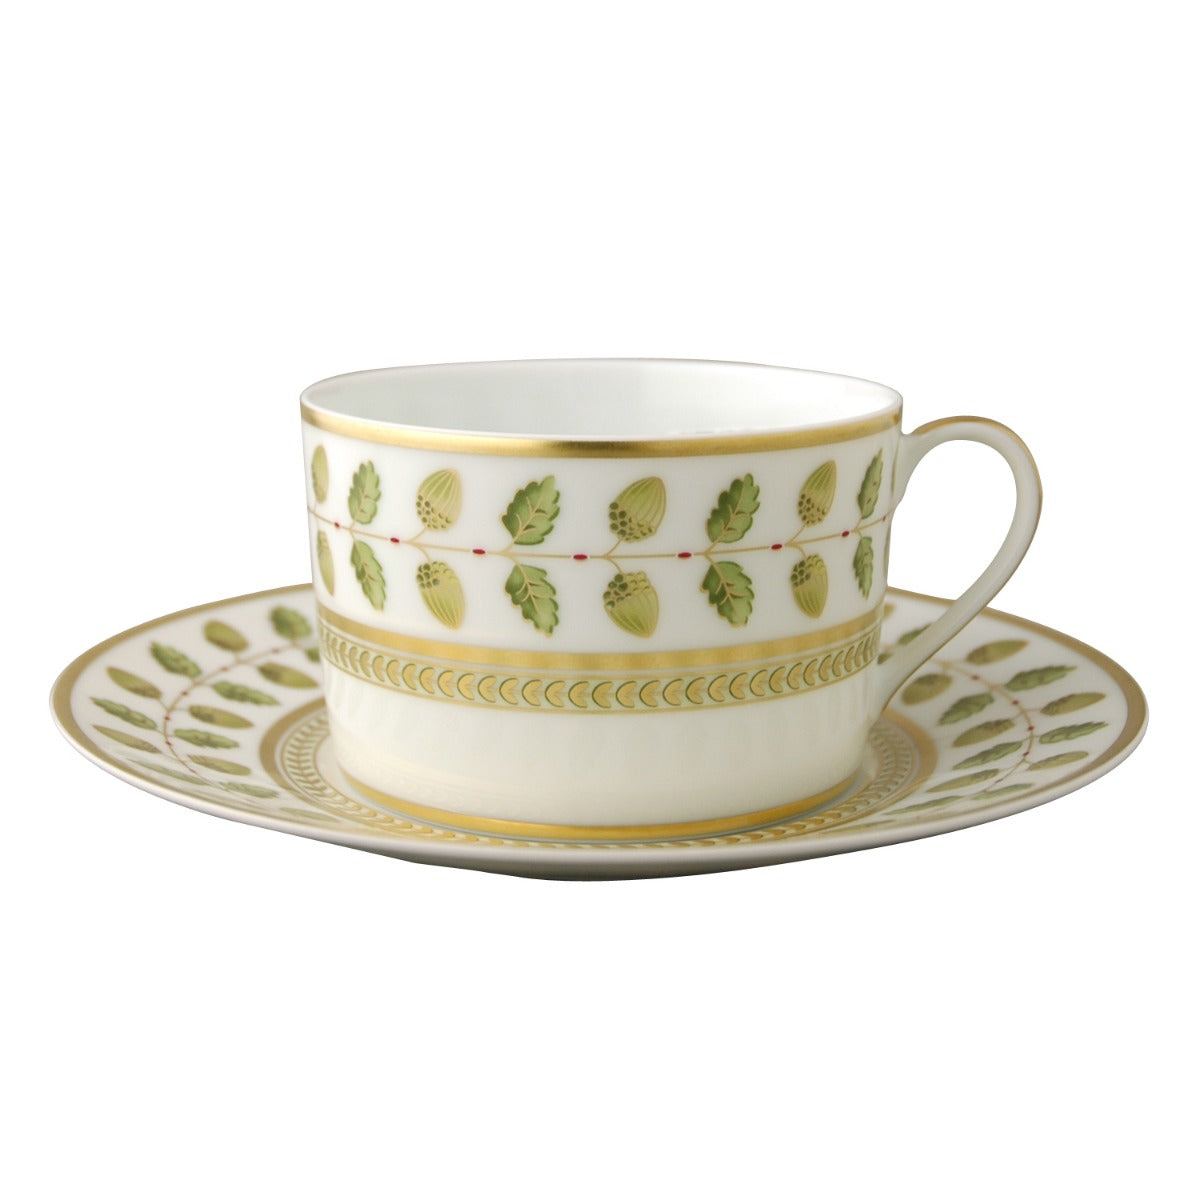 Breakfast cup and saucer